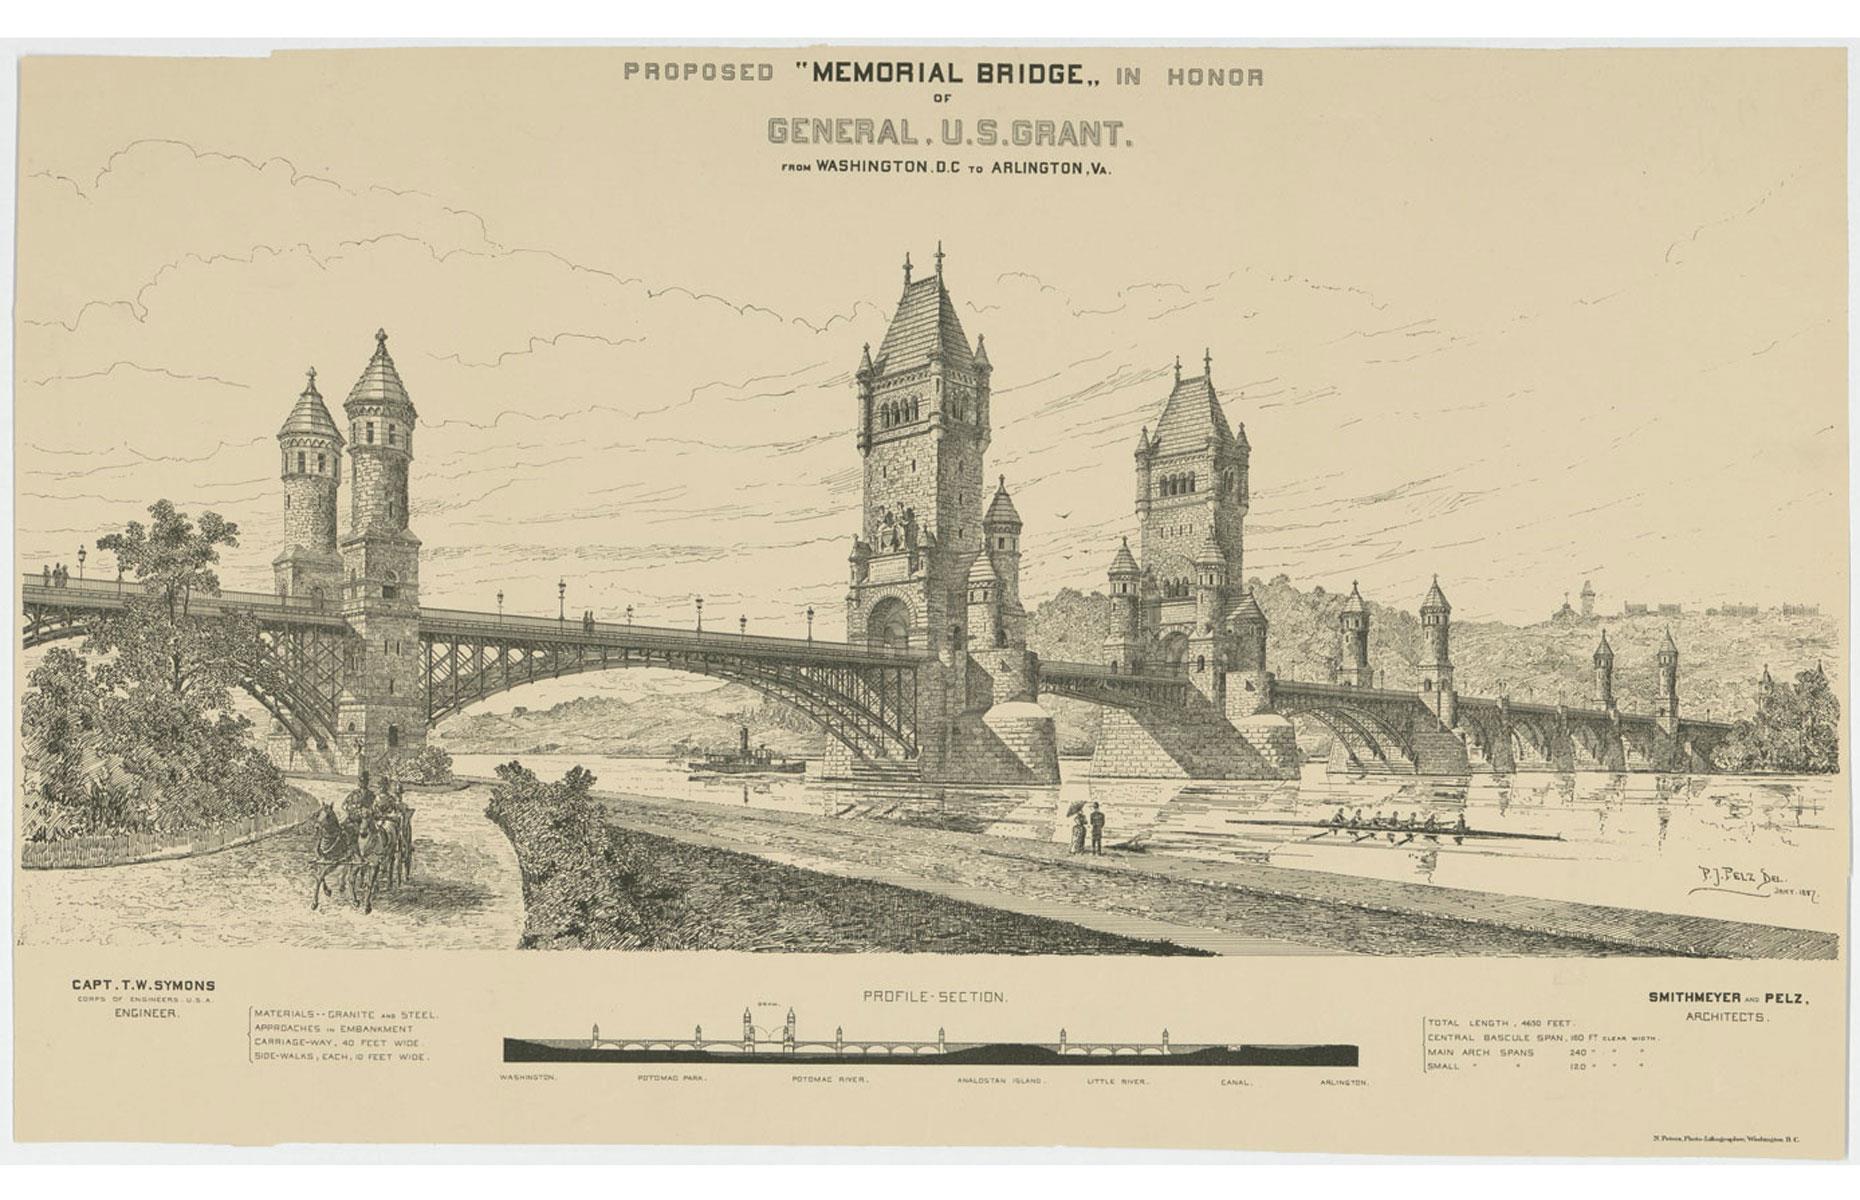 This more distinctive Neo-Gothic design was proposed by architect Paul J. Pelz in 1887 as a homage to General Ulysses S. Grant. Congress wasn't too keen on facilitating a memorial to Grant and blocked funding of the original design, eventually giving the all-clear for the Neoclassical bridge years later.